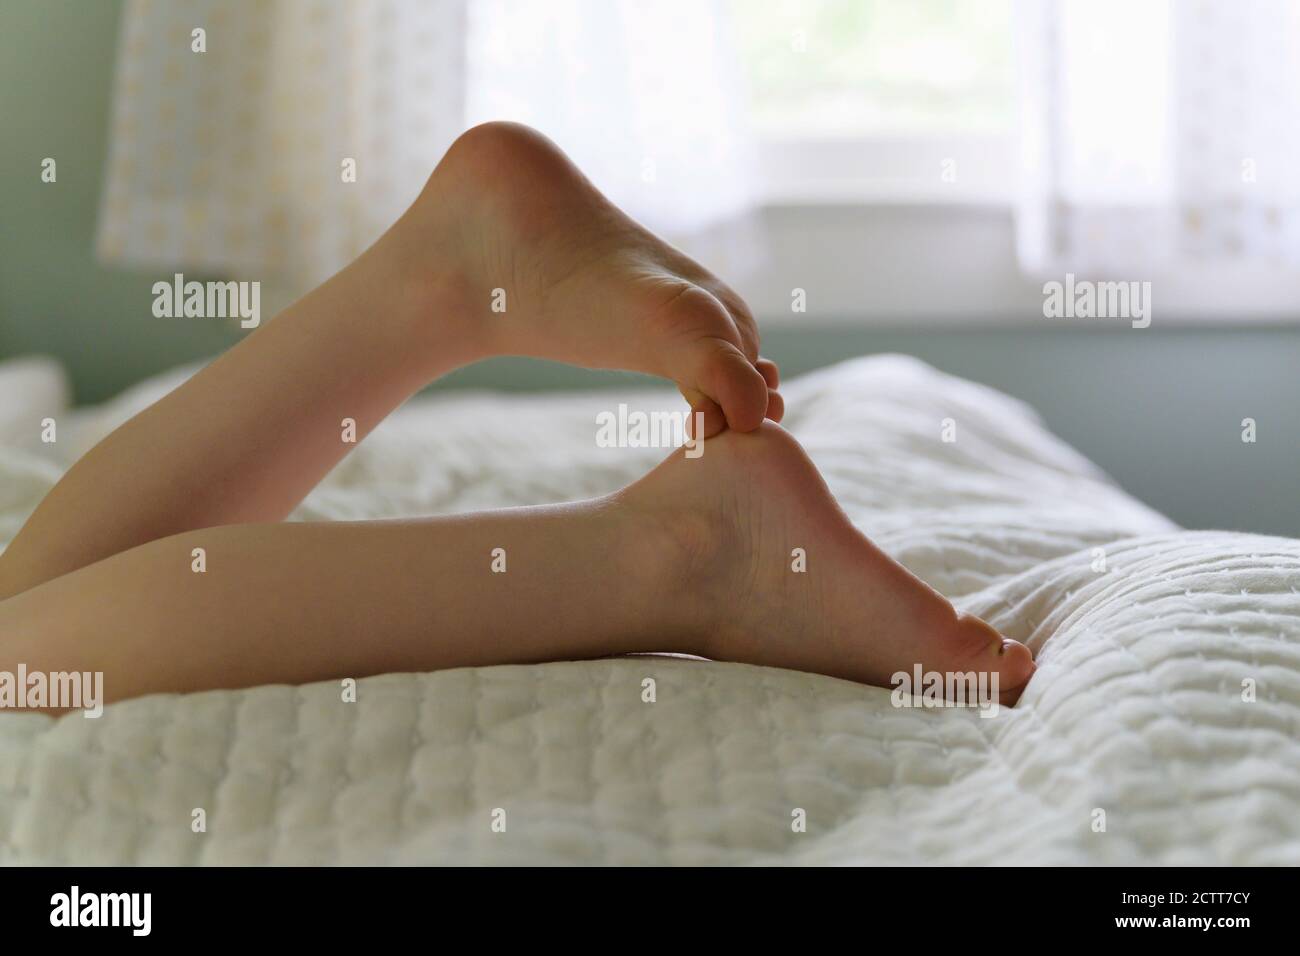 Low section of child (4-5) lying on bed Stock Photo